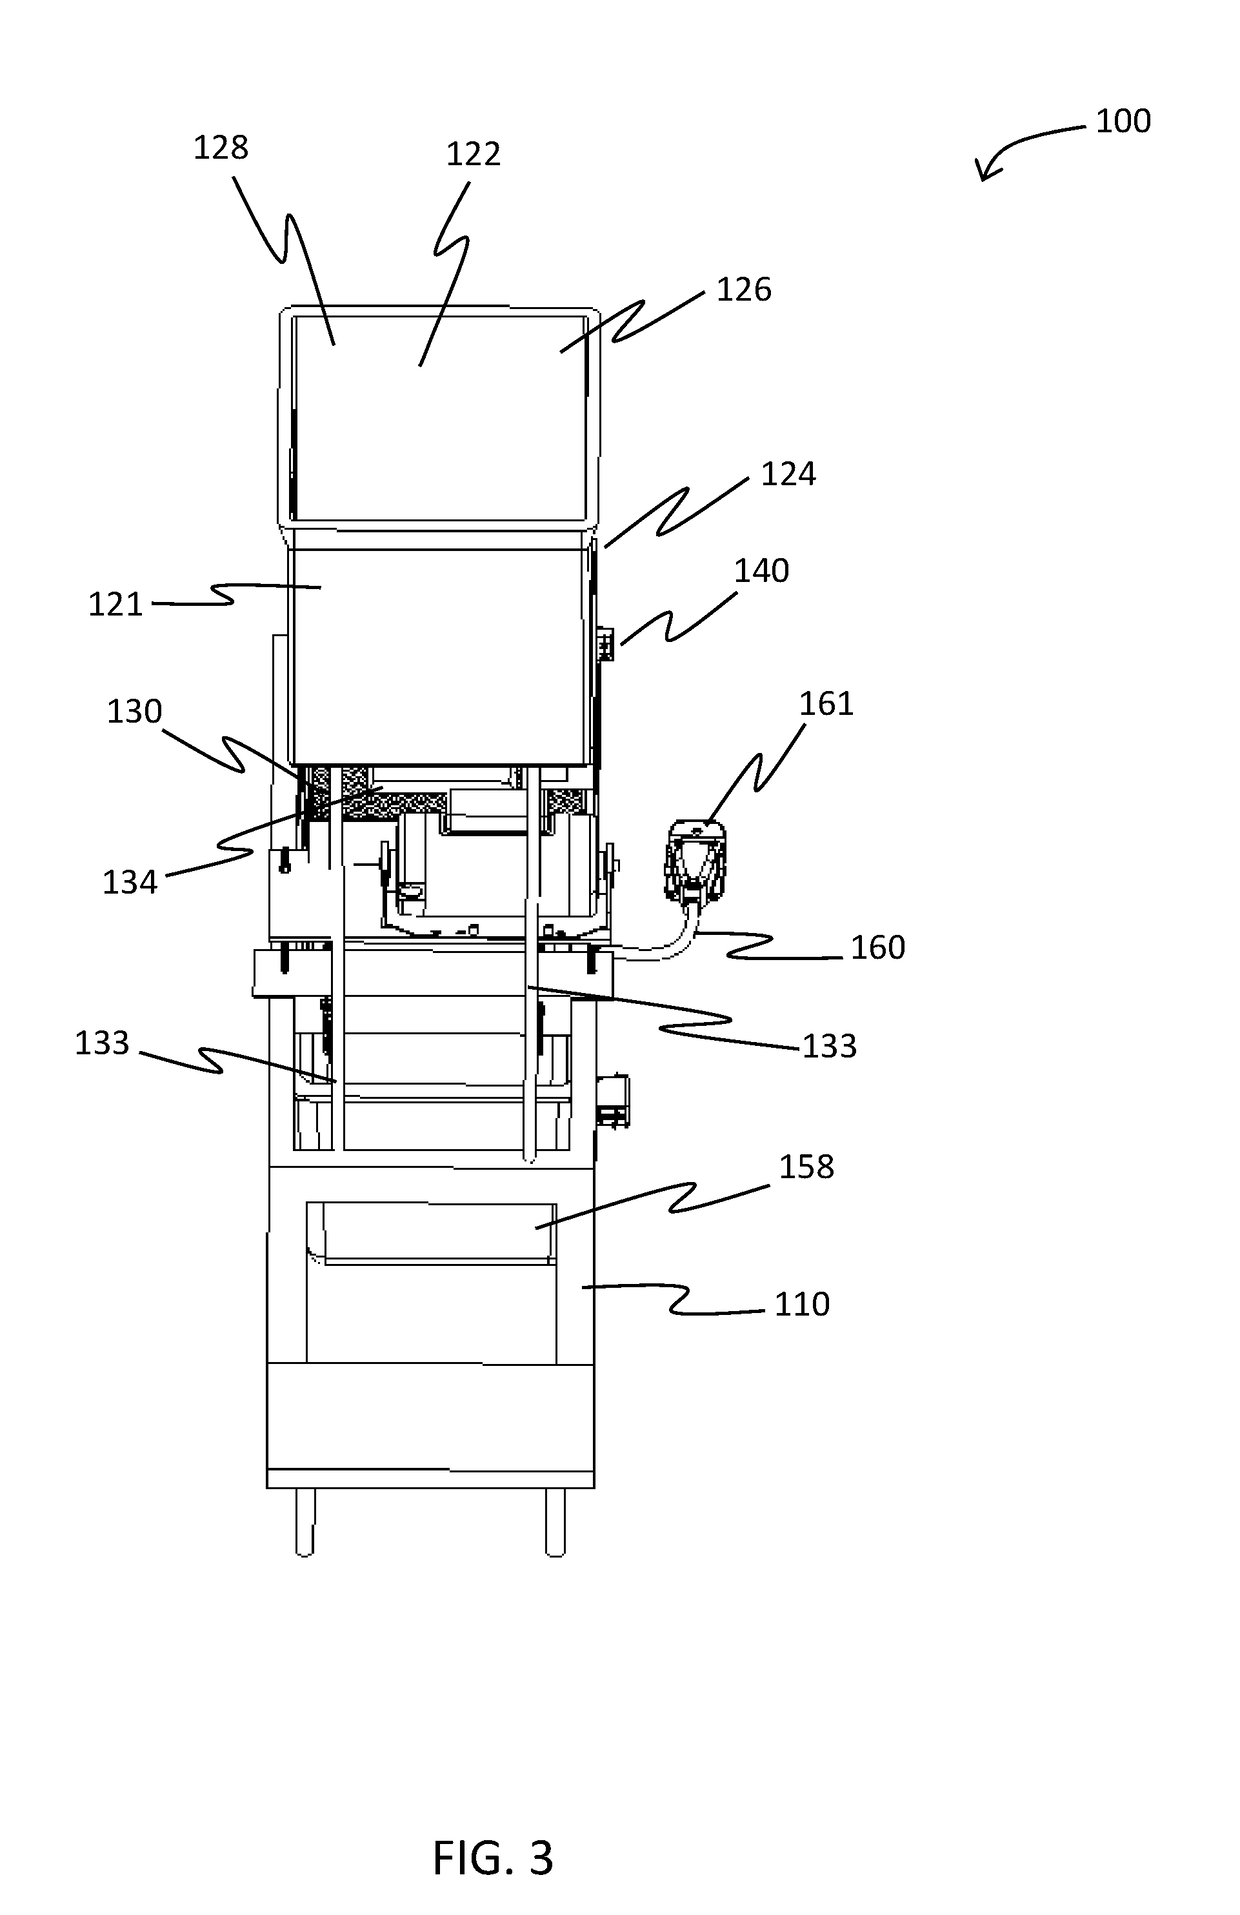 Apparatus for processing cannabis